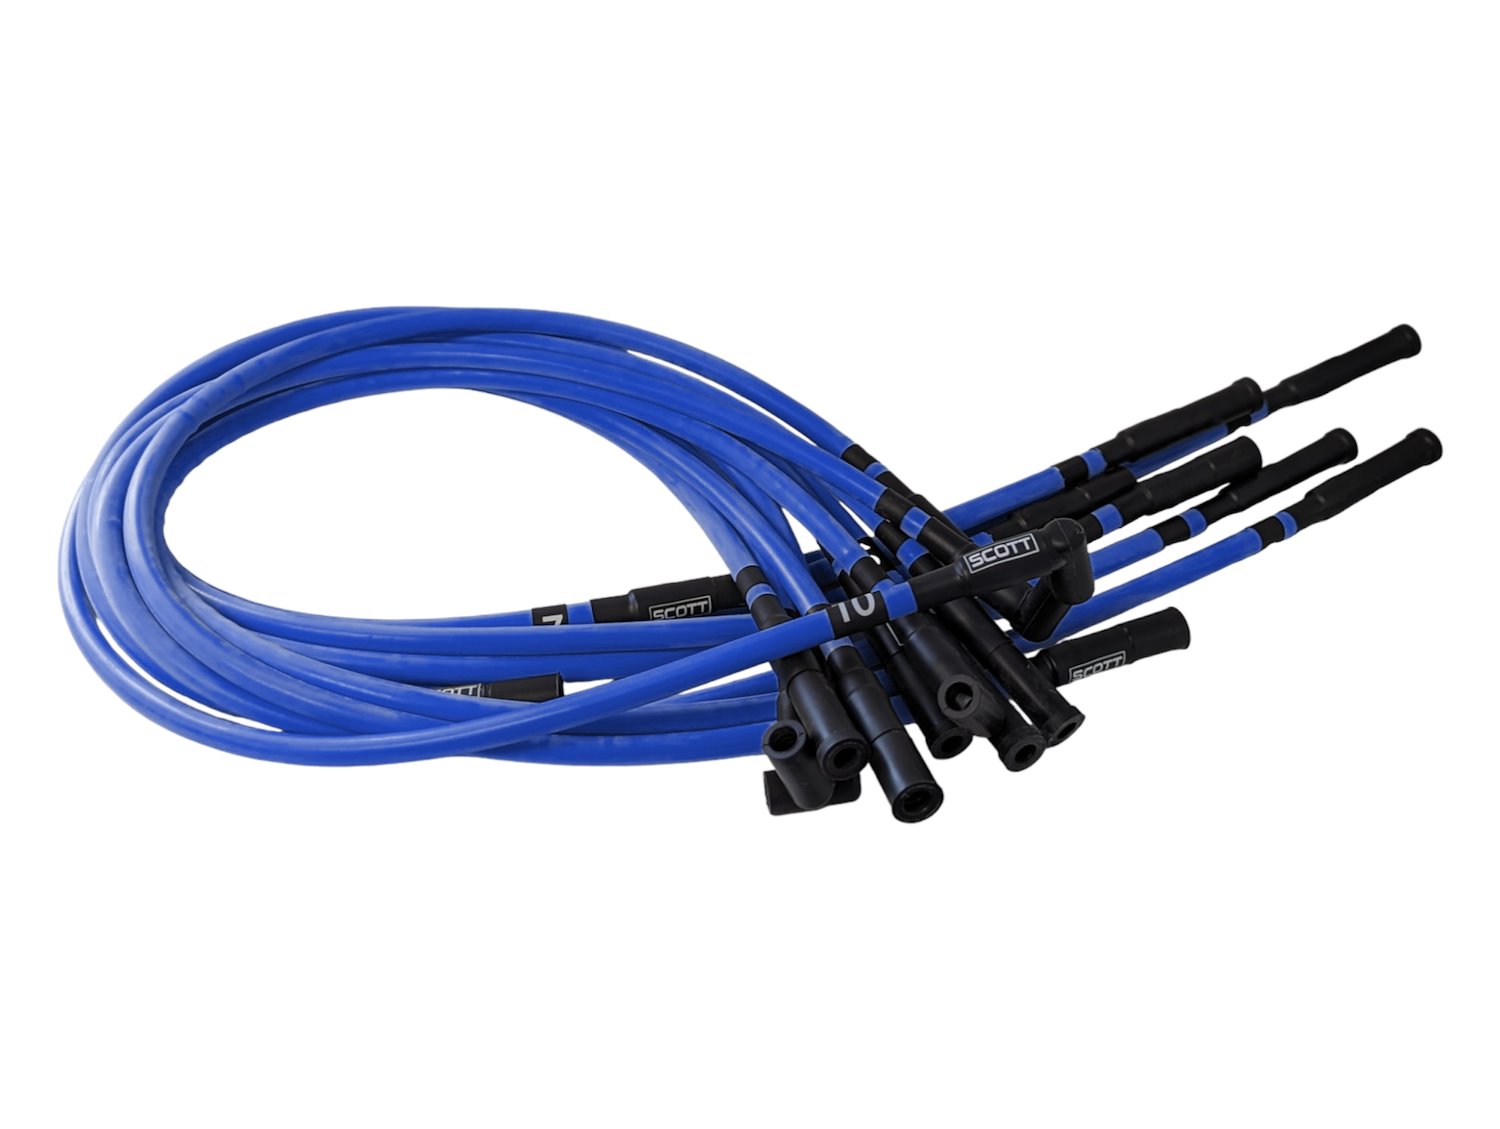 SPW-CH-690-I-4 High-Performance Silicone-Sleeved Spark Plug Wire Set for Dodge Viper (Gen-1) [Blue]